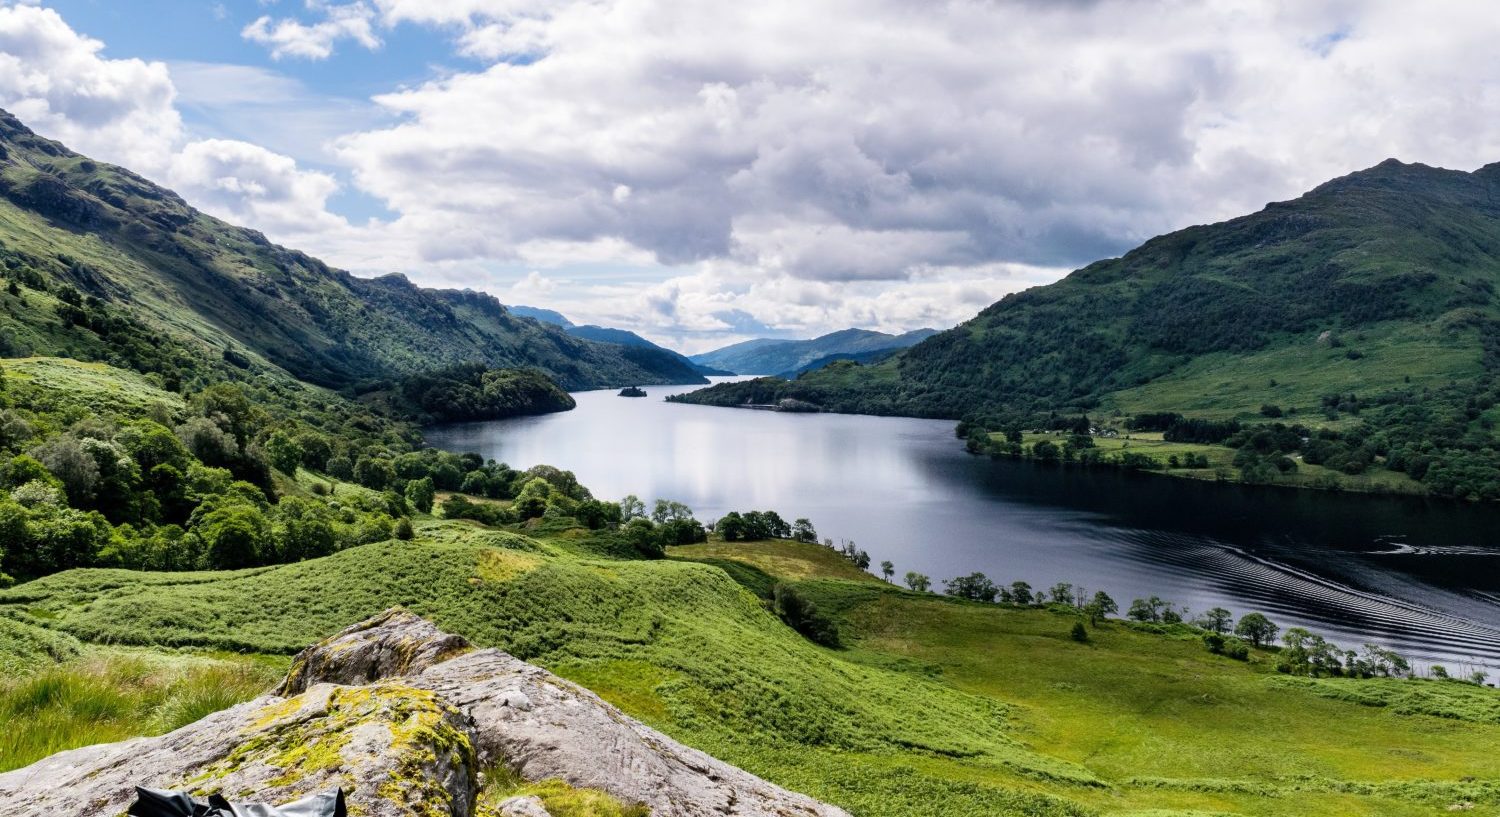 Thrifty Traveler’s Guide to the Scottish Highlands